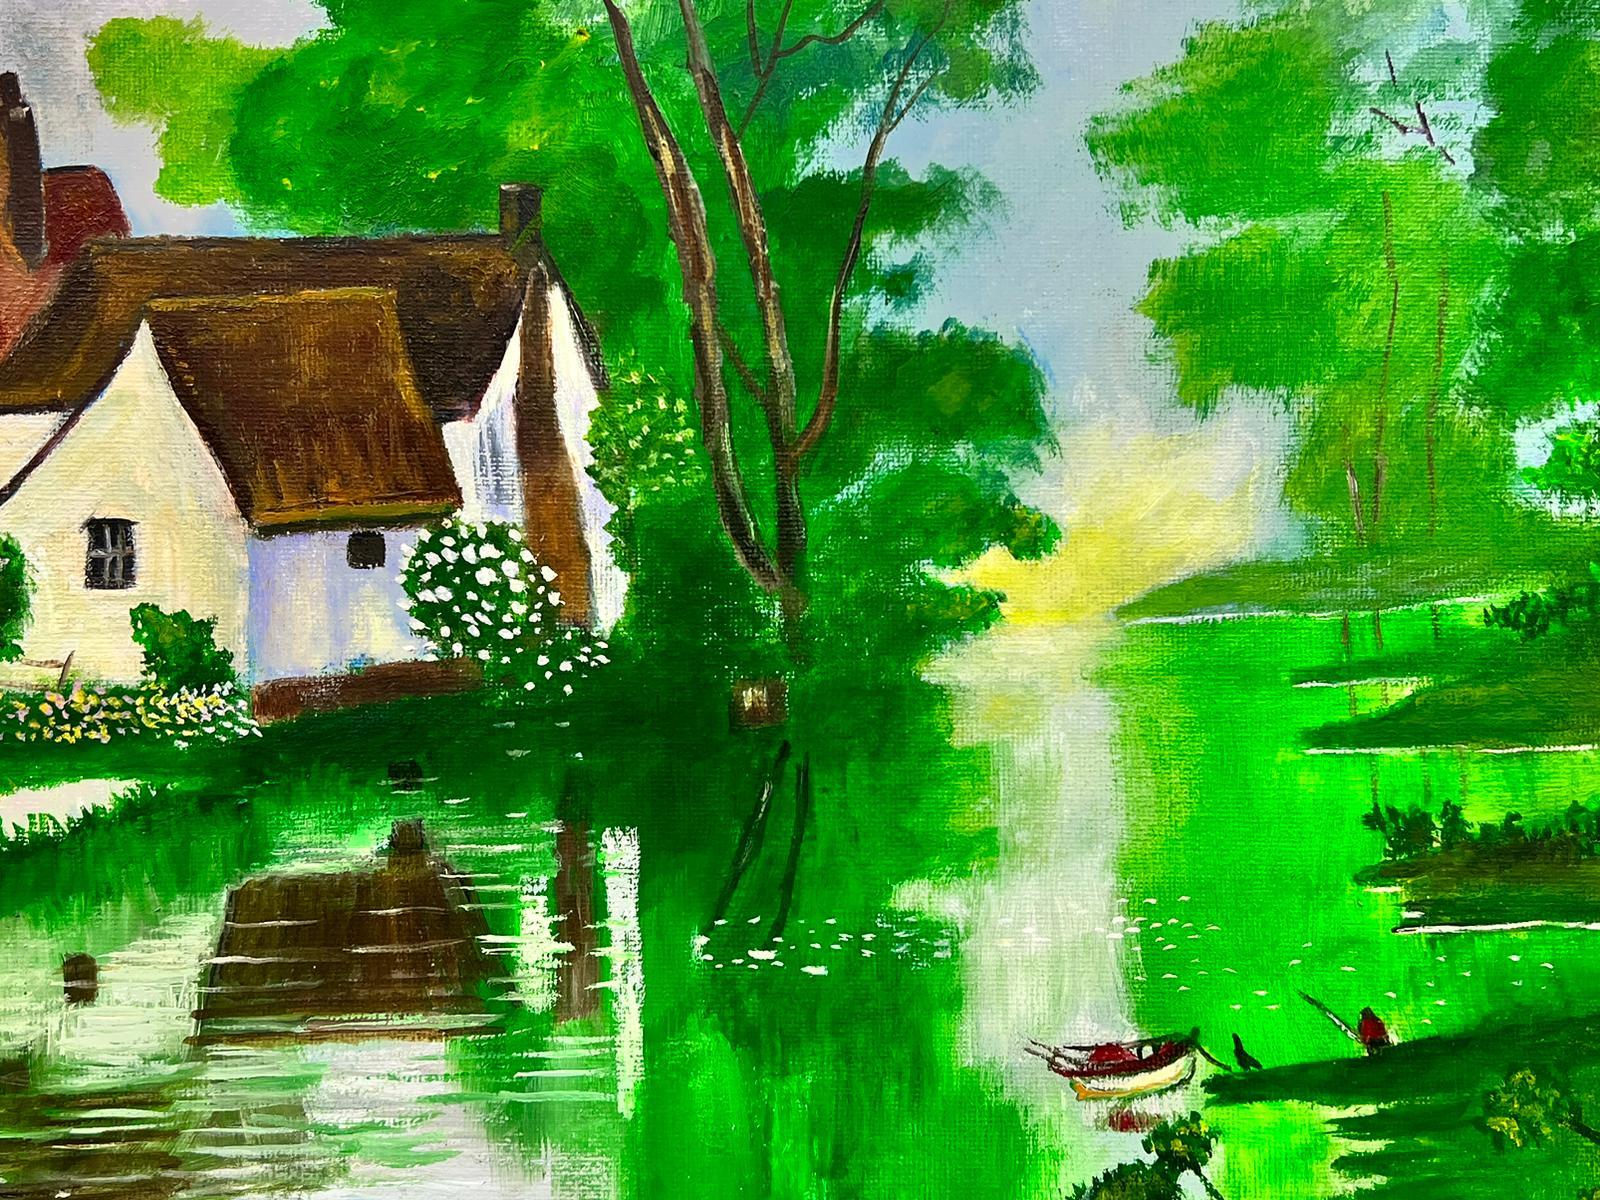 Willy Lots Cottage, Flatford Mill
by Ben George Powell, British contemporary artist
signed
acrylic on canvas unframed
canvas: 16 x 20 inches
provenance: private collection of this artists work, UK
The painting is in very good and presentable